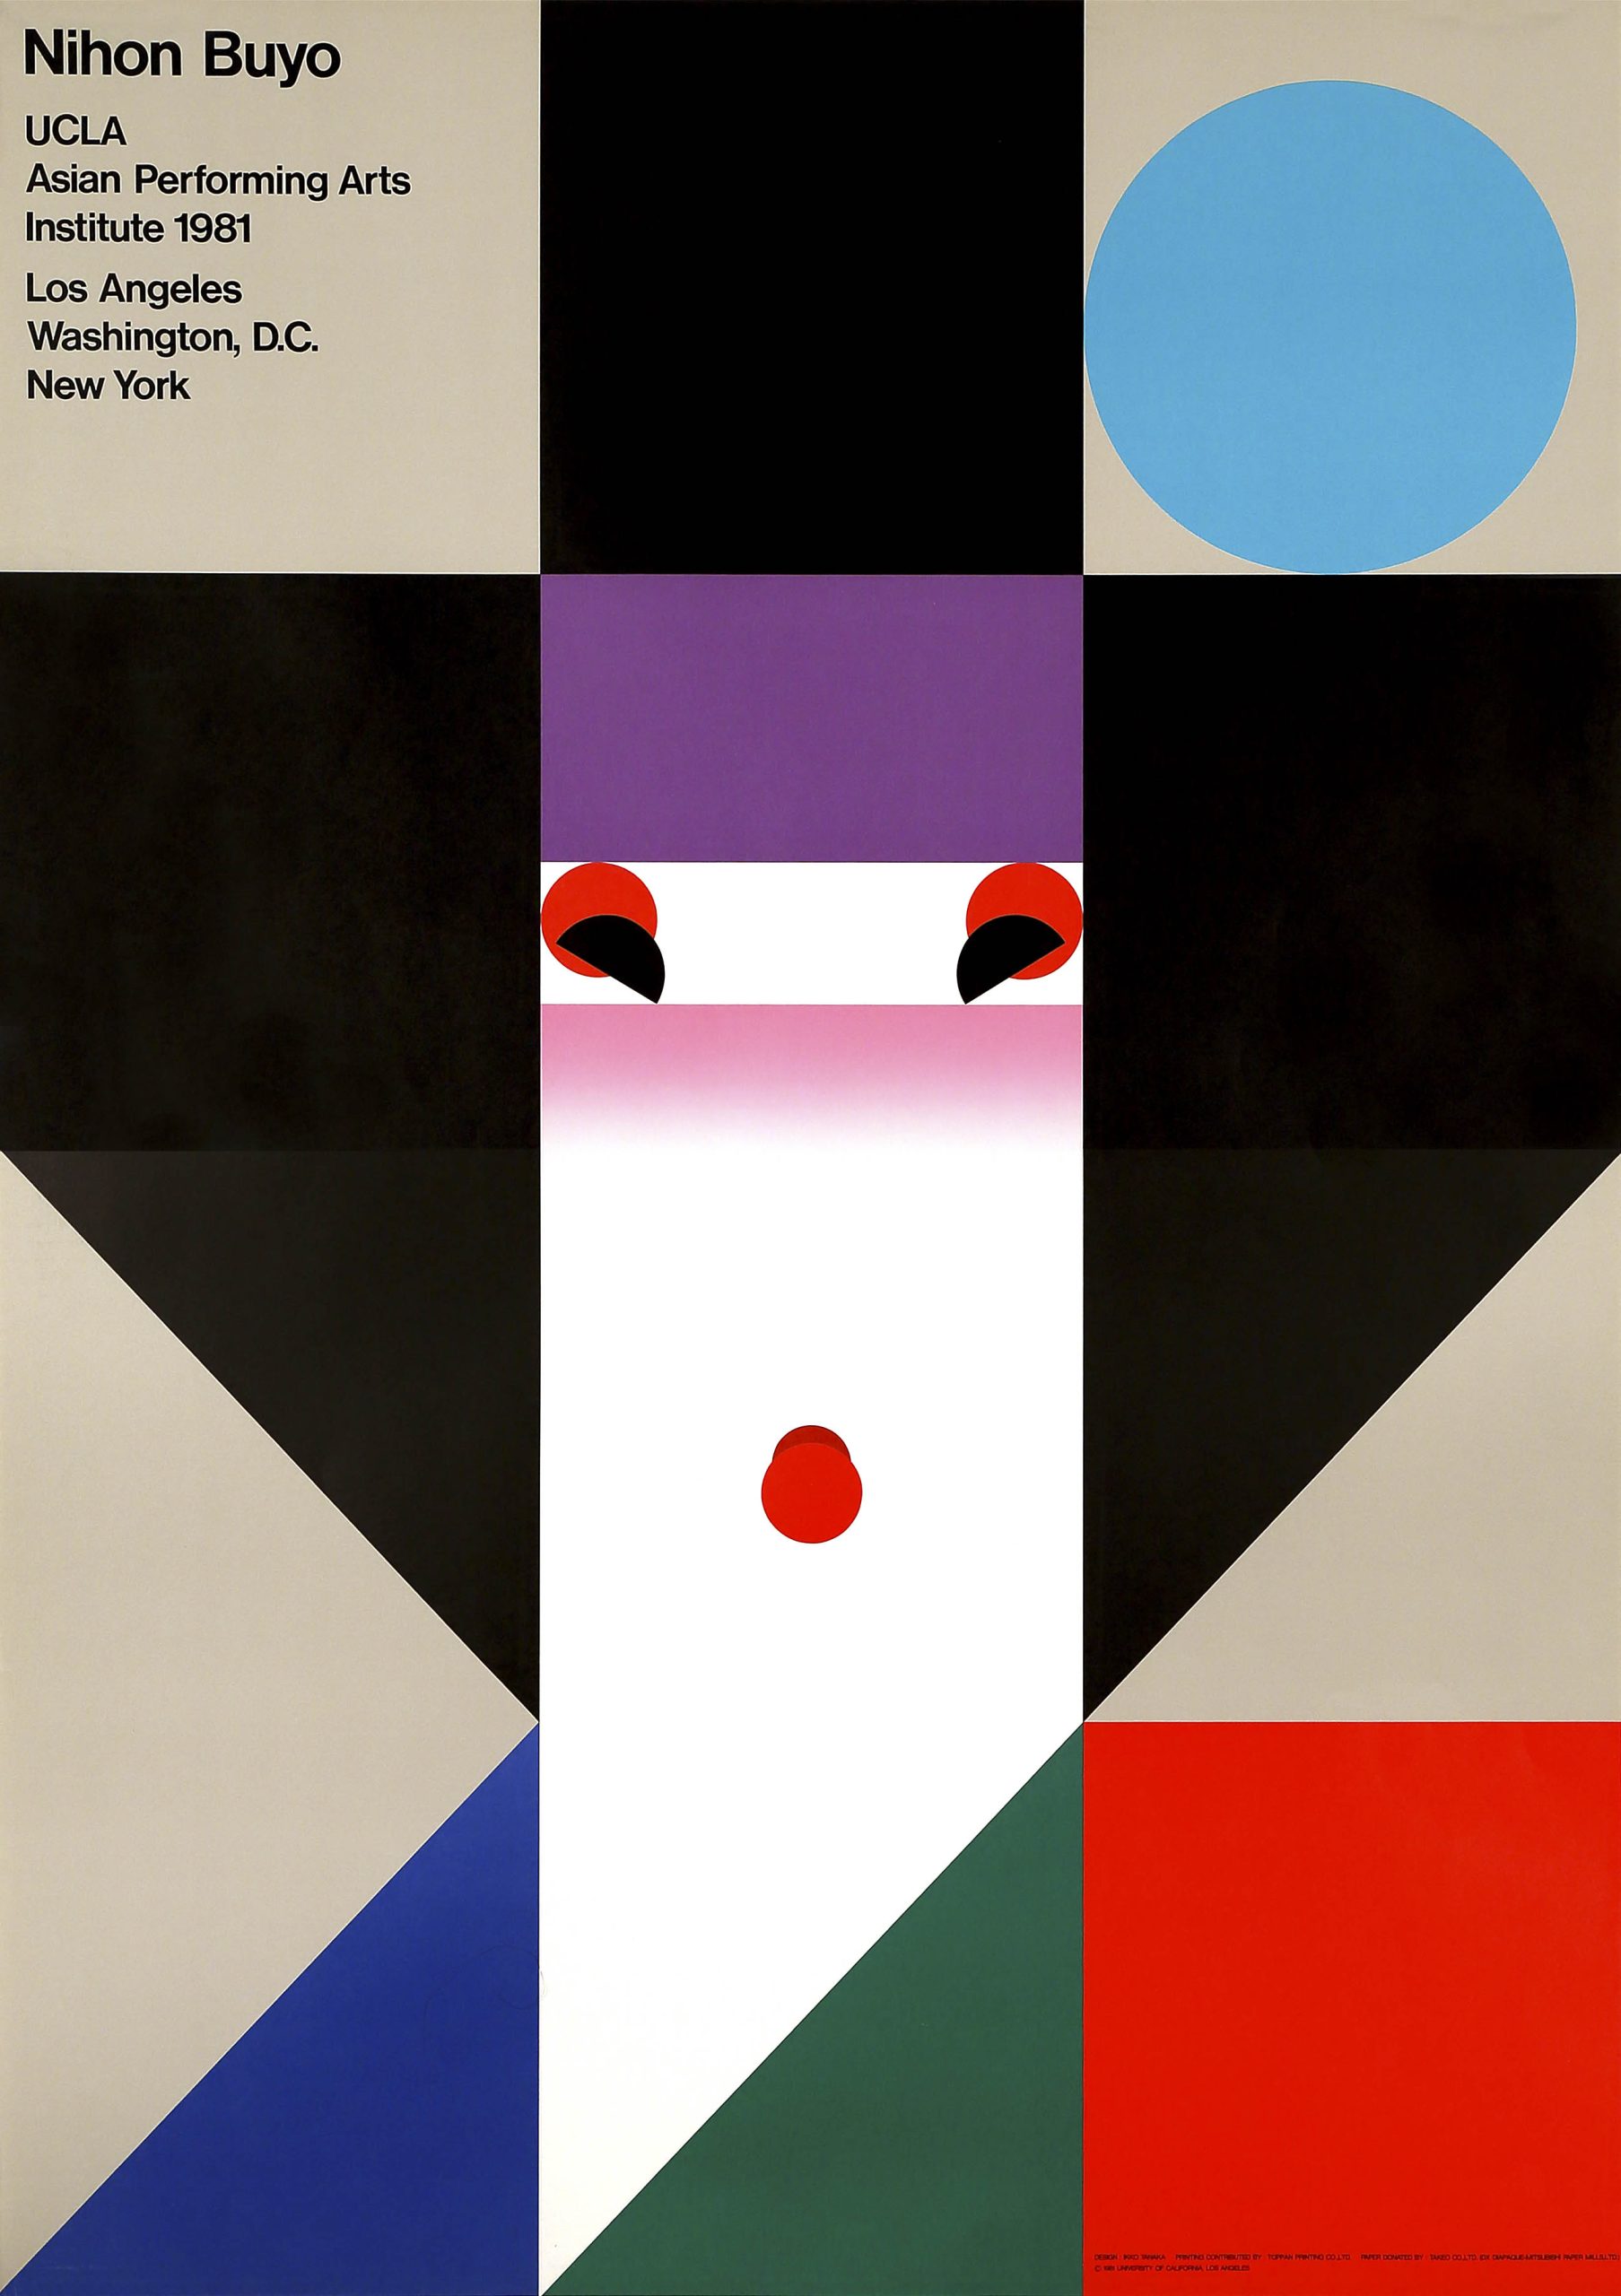 An offset poster of a geisha's face made up of geometric shapes